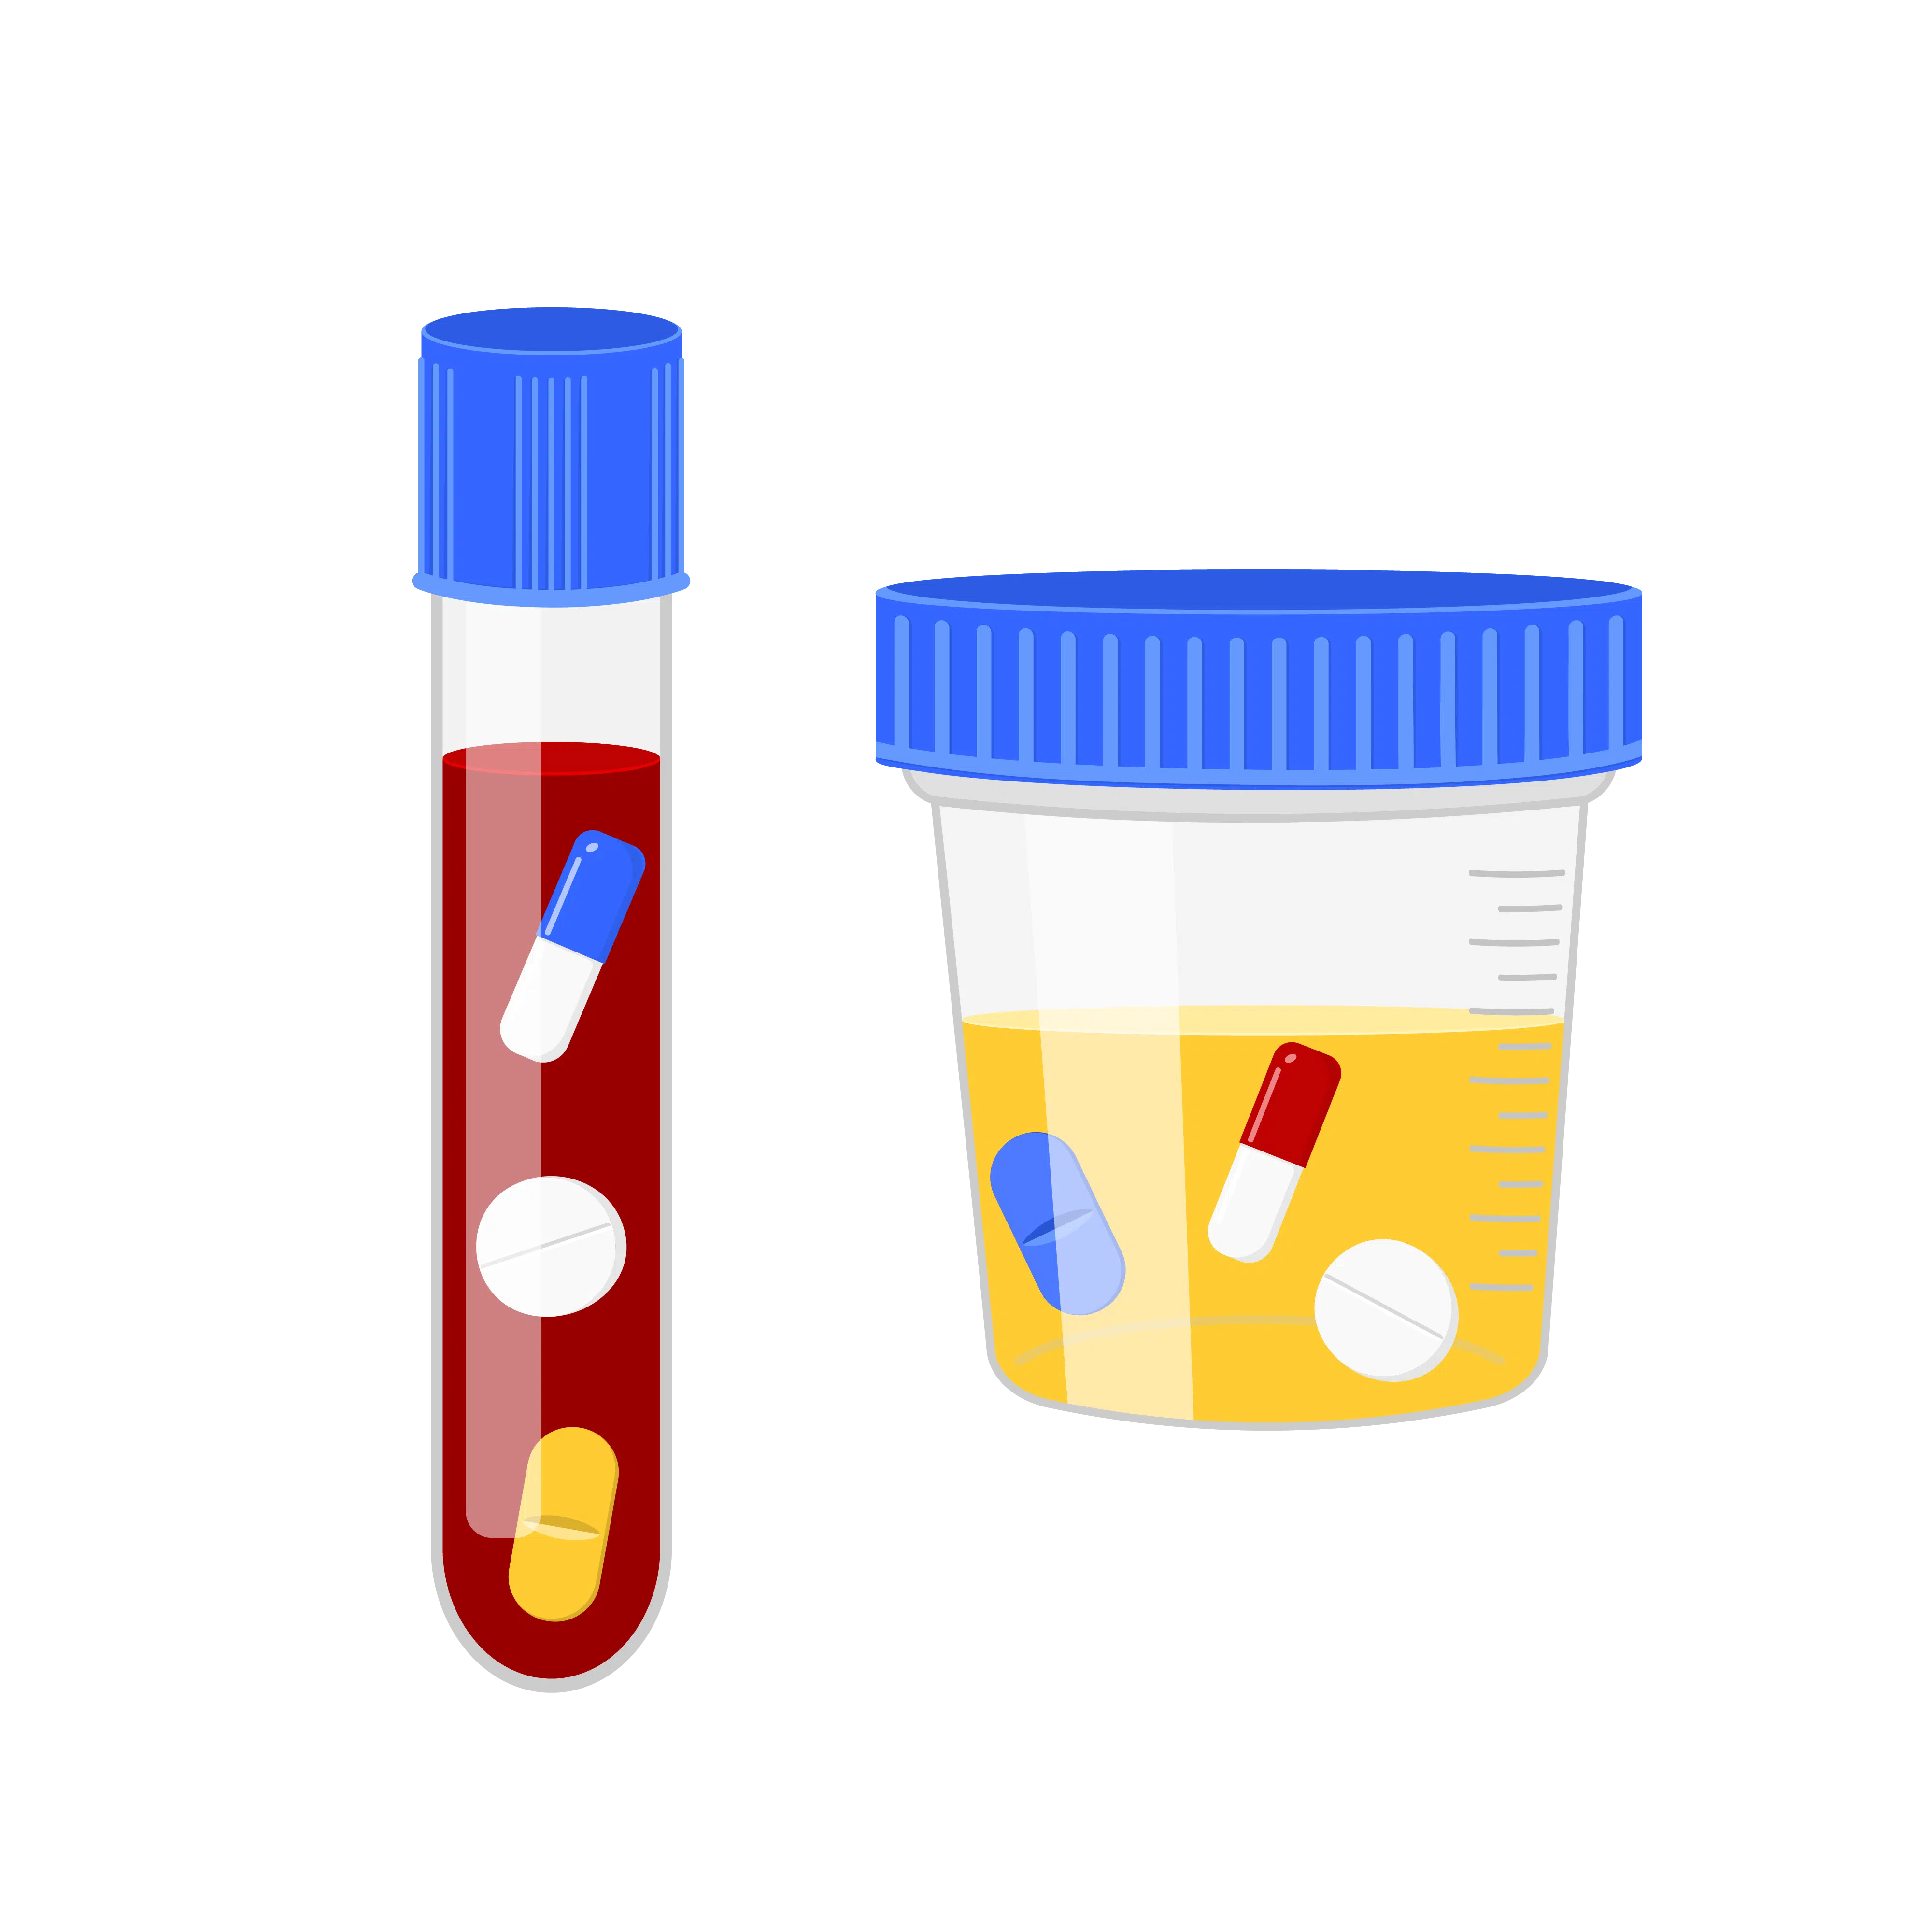 Xanax and medications in your urine and blood drug test samples